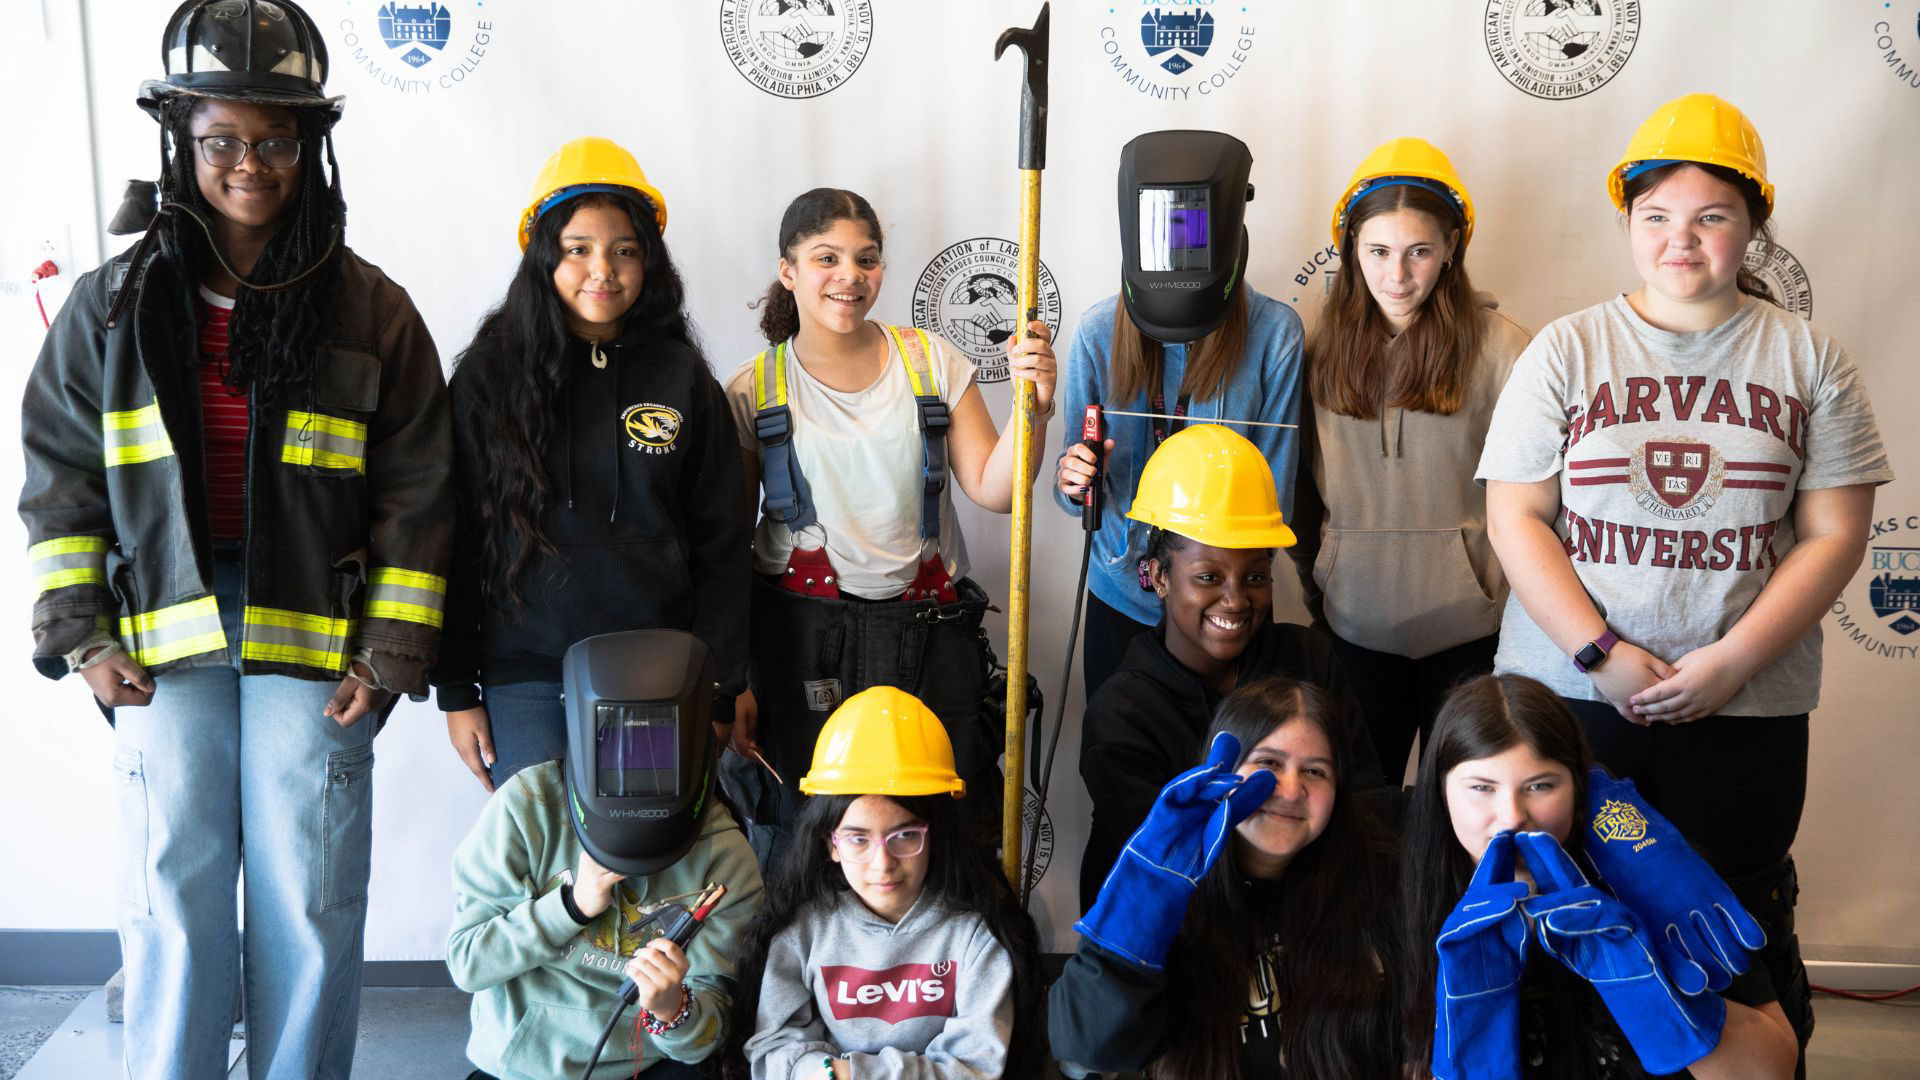 Female middle school students representing various building and construction trades as well as emergency responders pose for a group photo during ‘Girls Ignite'